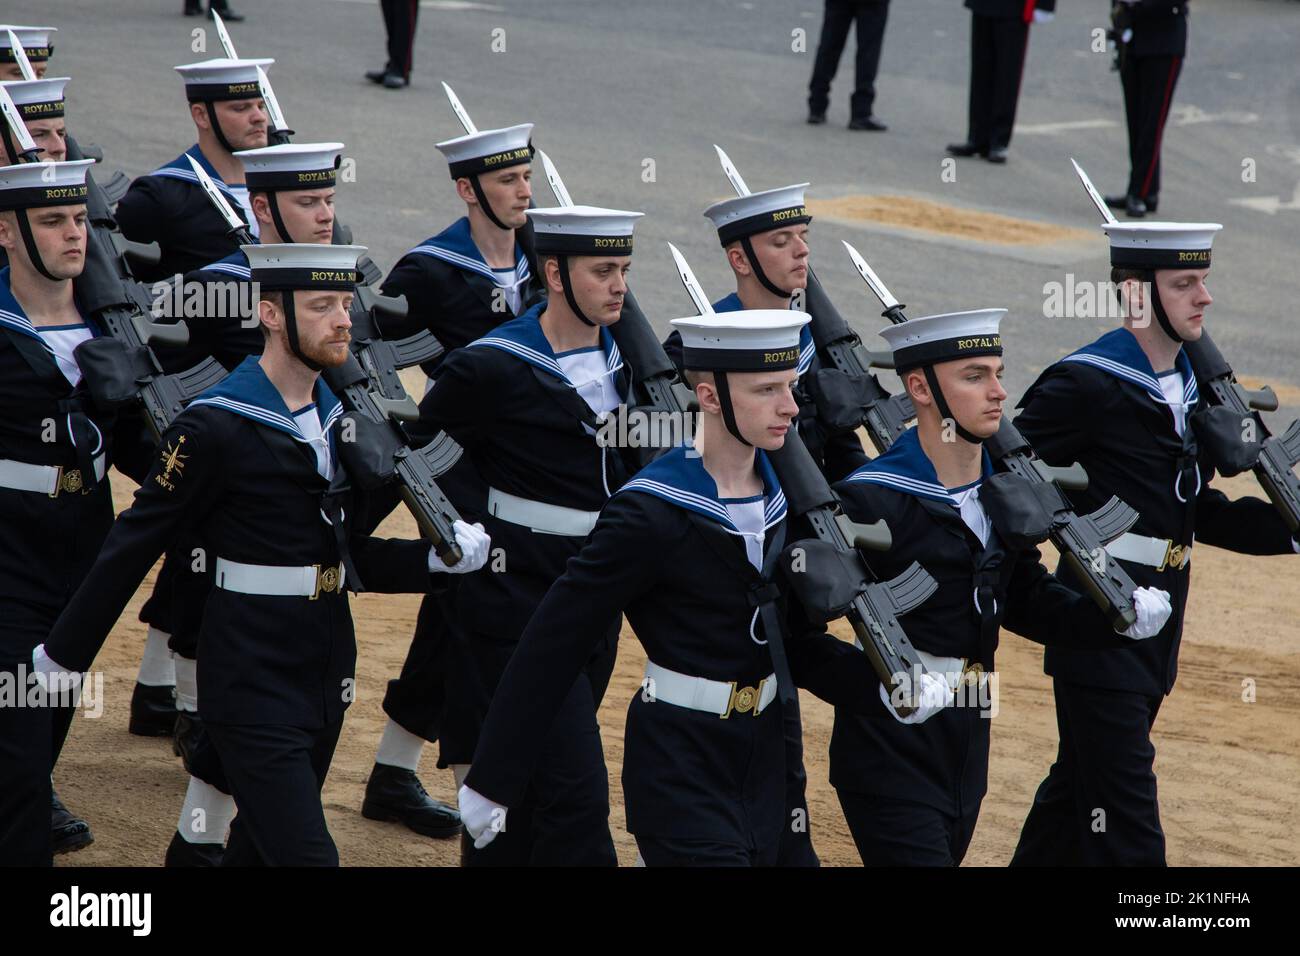 London, England. 19th September, 2022. Members of the Royal Navy took part in a procession for State Funeral of Queen Elizabeth II. The event was held in London and Windsor today and was one of the biggest the country has ever seen. Credit: Kiki Streitberger / Alamy Live News Stock Photo